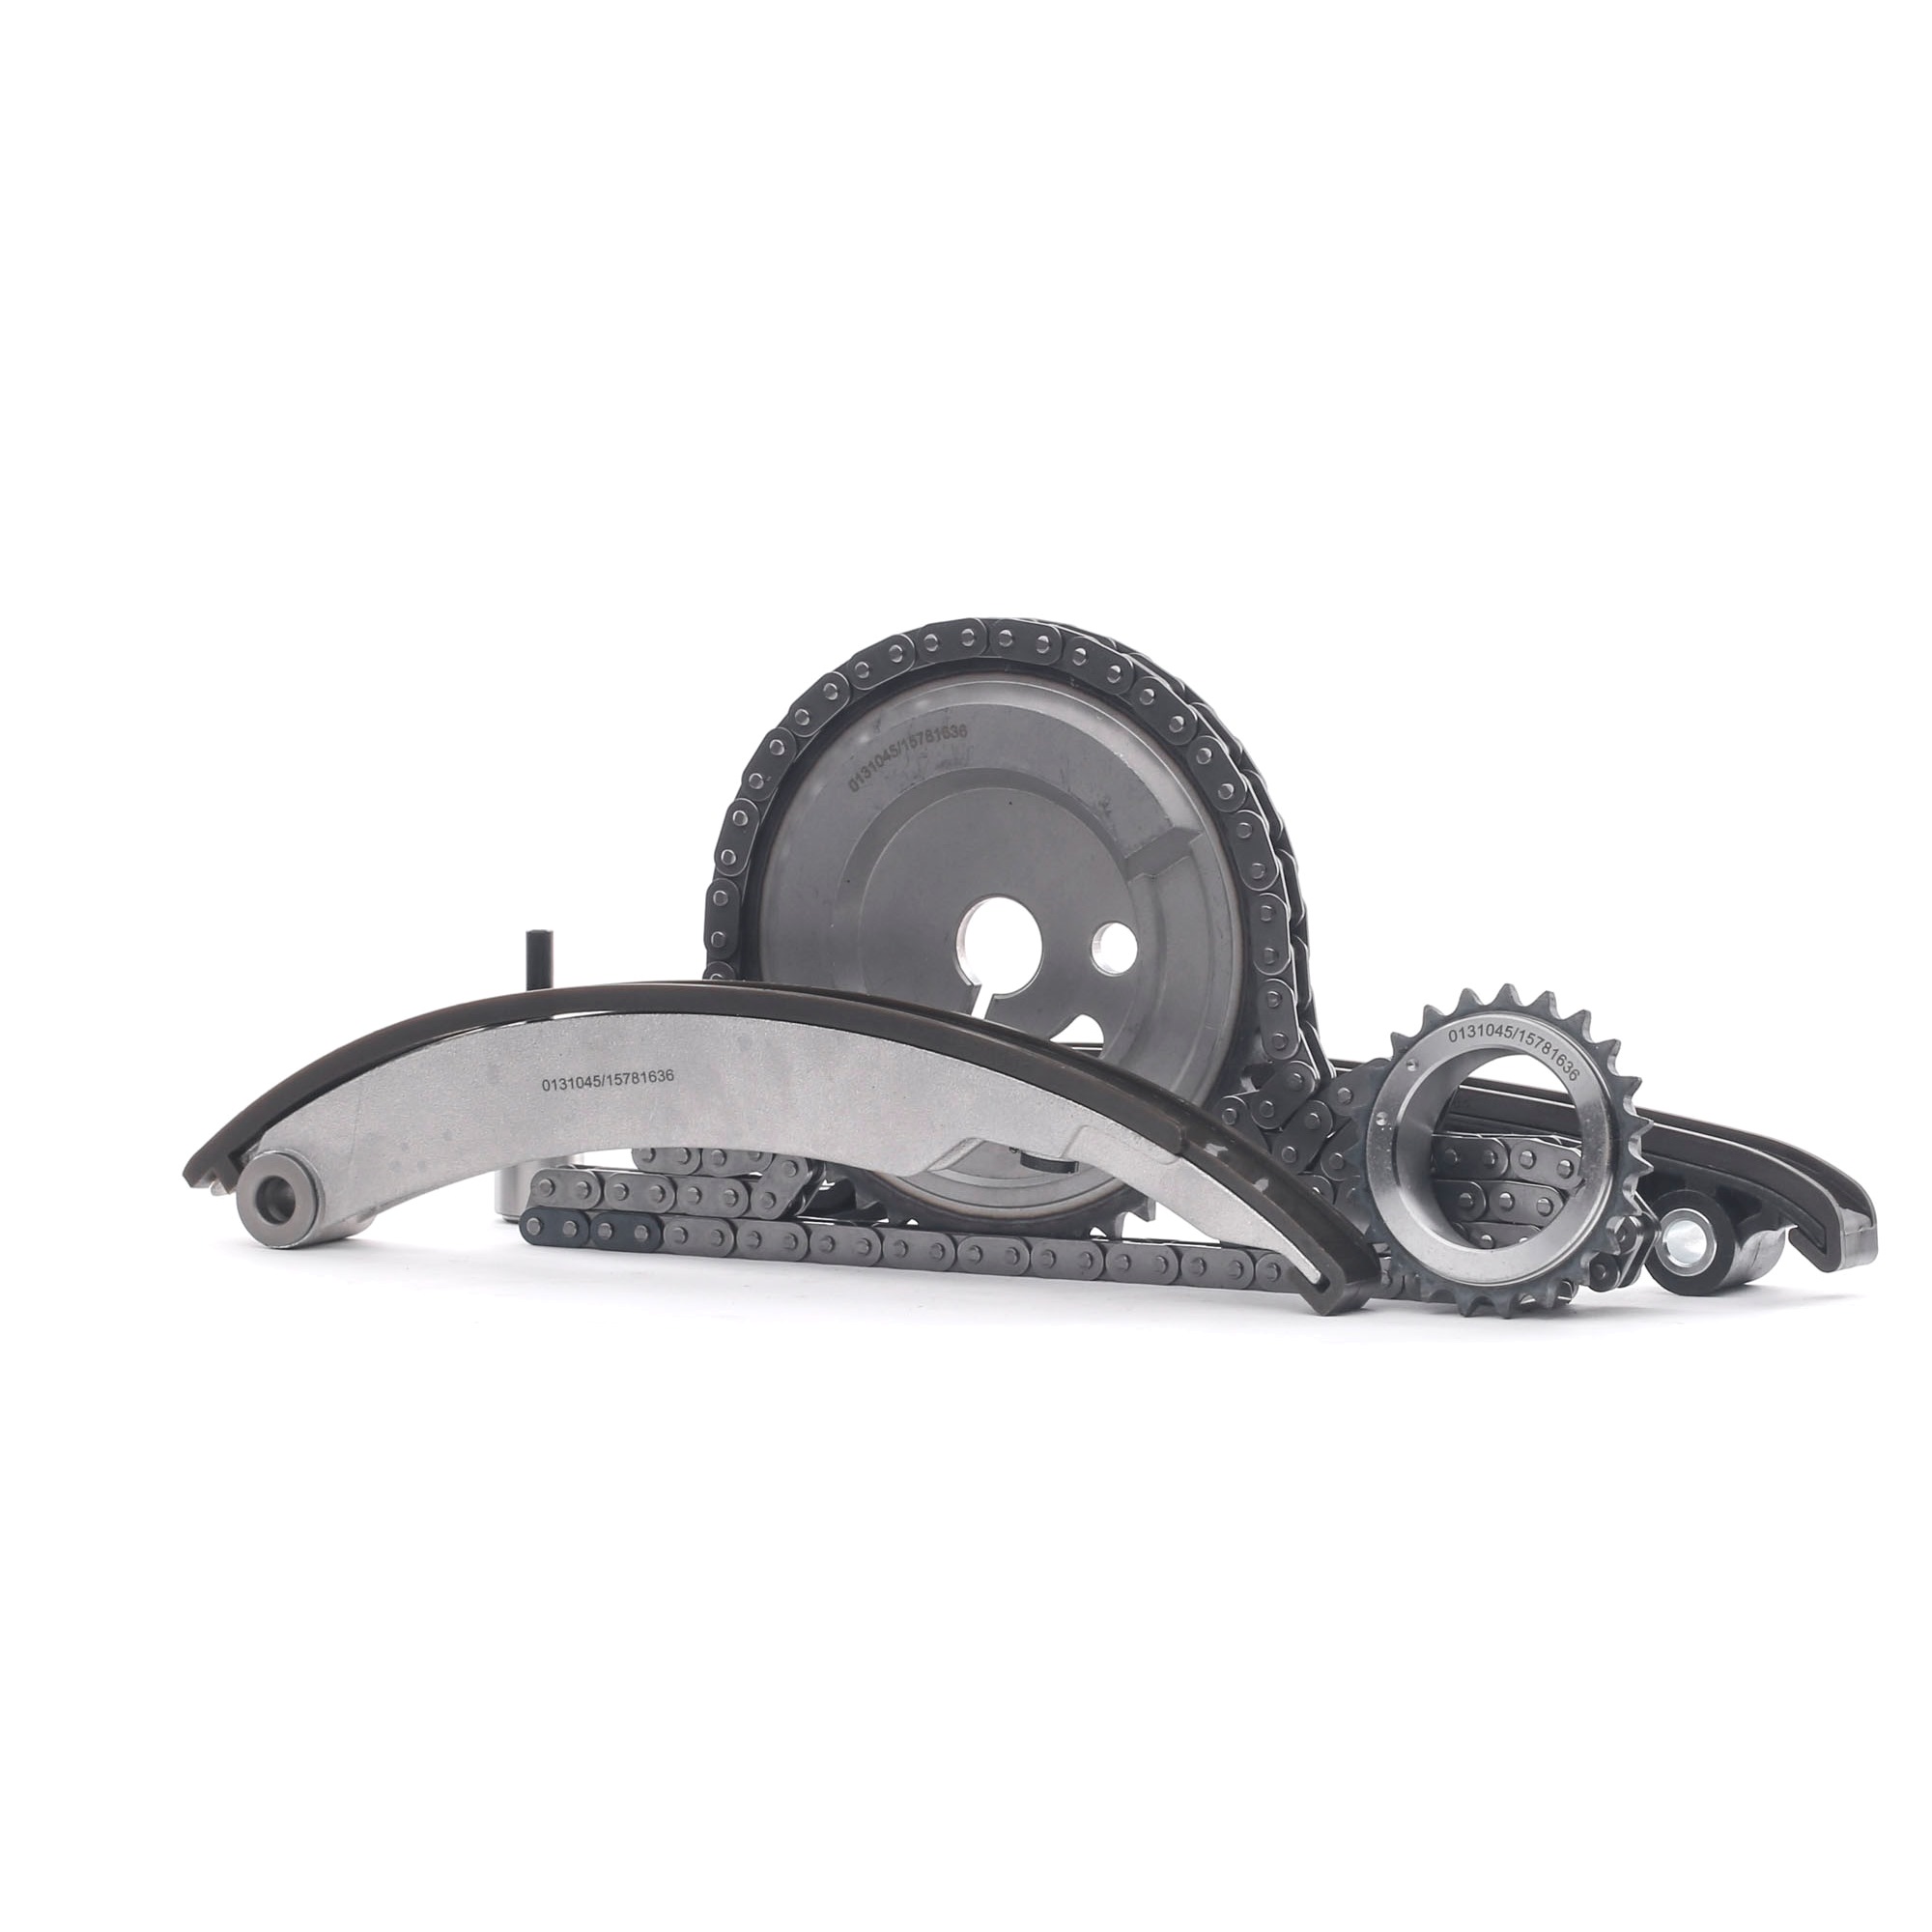 SKTCK-22440266 STARK Timing chain set MINI without gaskets/seals, with gear, Simplex, Closed chain